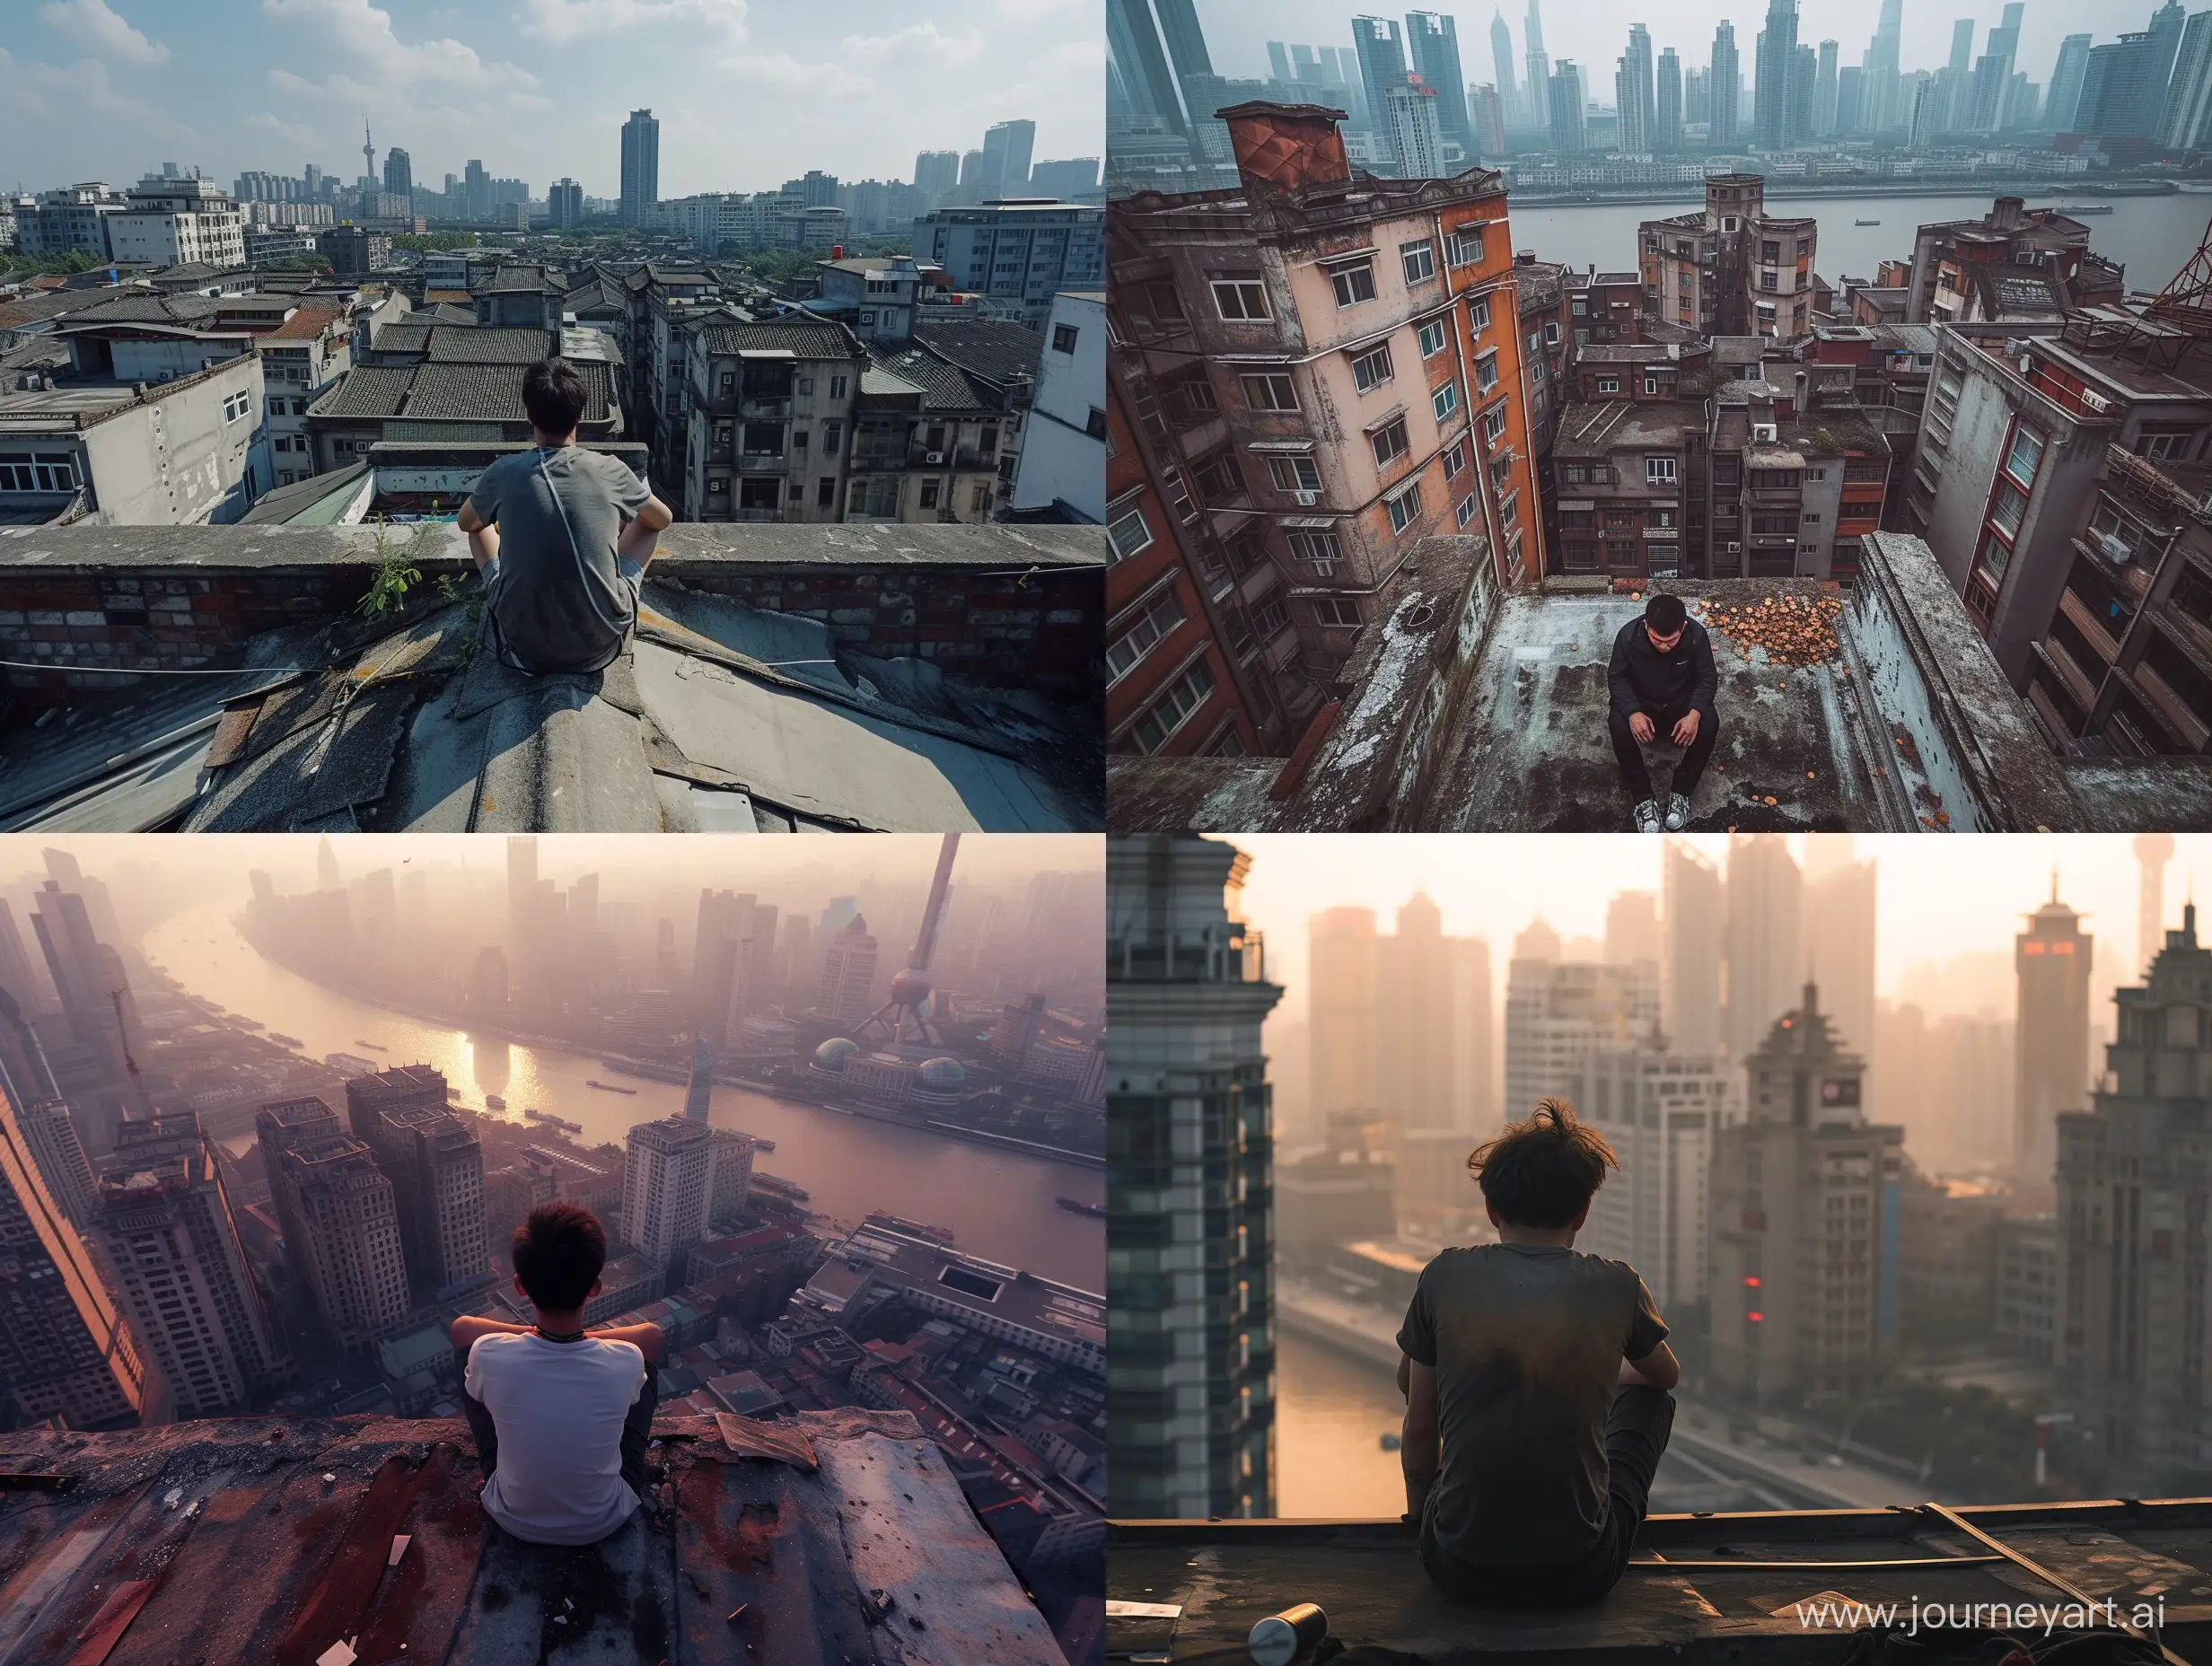 a photo showcasing a 1st person view perspective of man sitting on a rooftop, natural lighting, day time, environment, shanghai, wide view, style raw,

